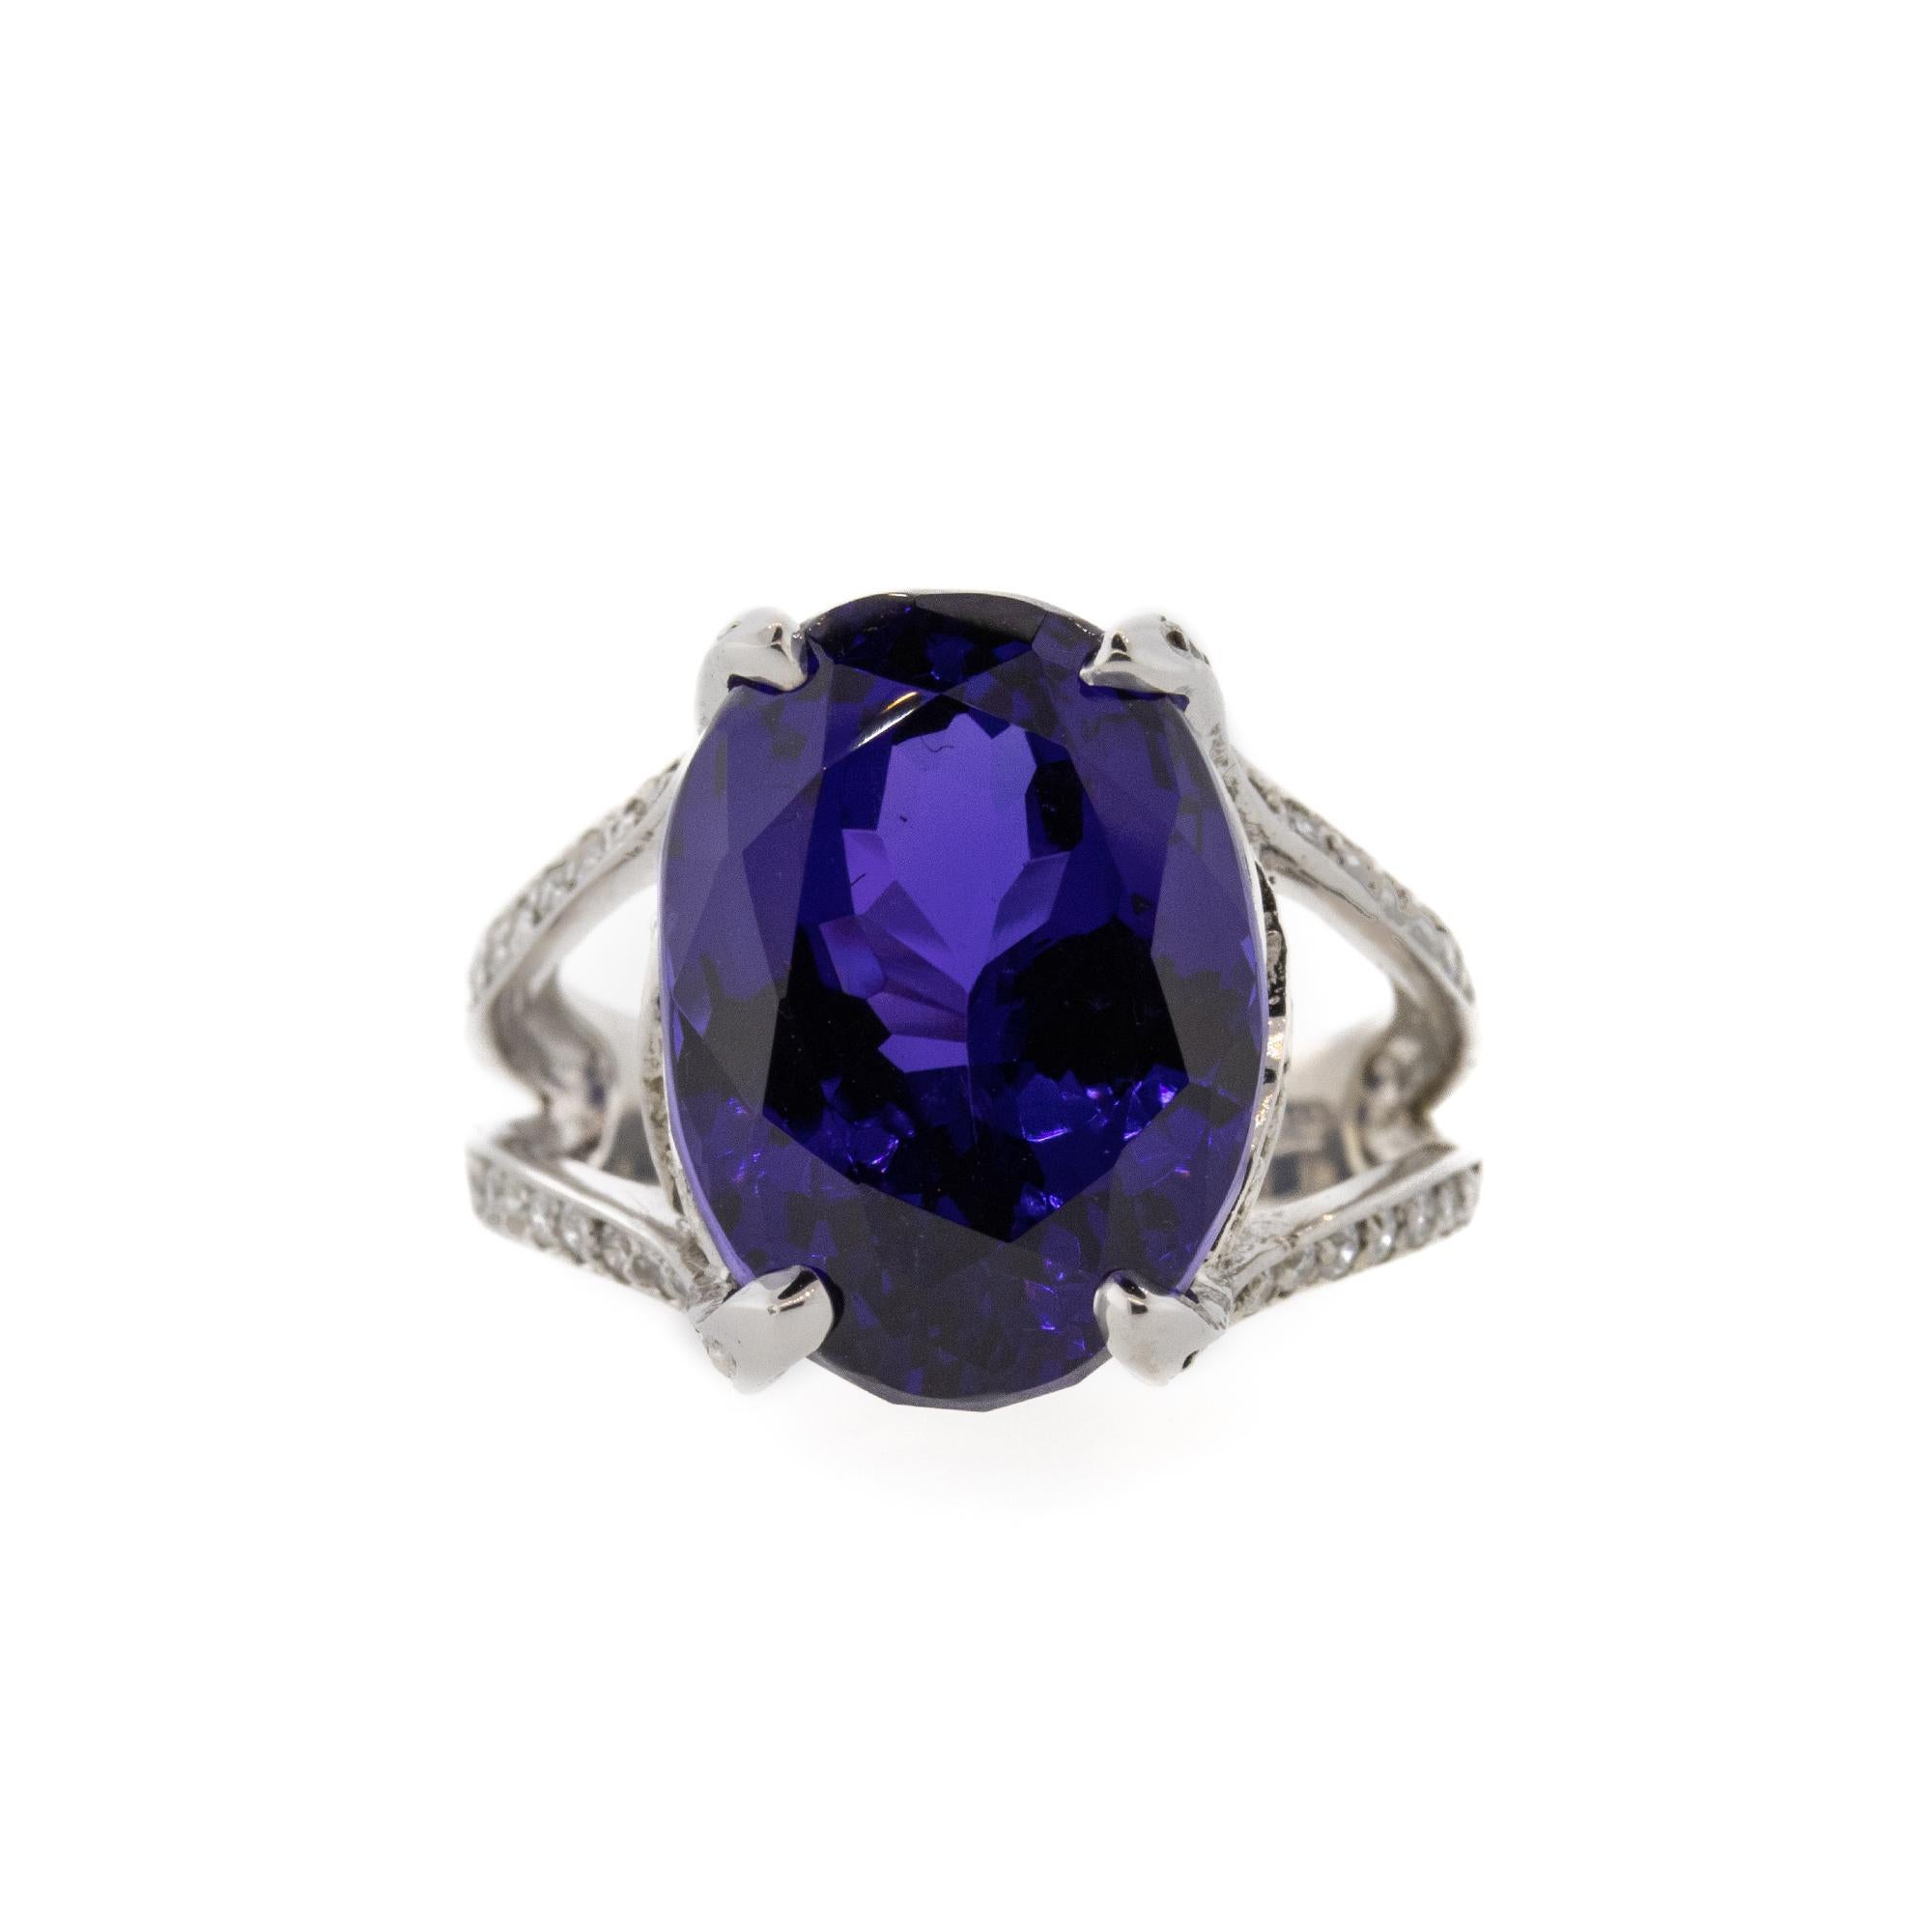 This amazing natural oval cut fine Tanzanite is the violet/blue color that lovers of the gem swoon over. The Tanzanite is 16.79ct and has .75ctw of G-H/VS-SI diamonds running down the shank and through the undercarriage of this 14k white gold ring.